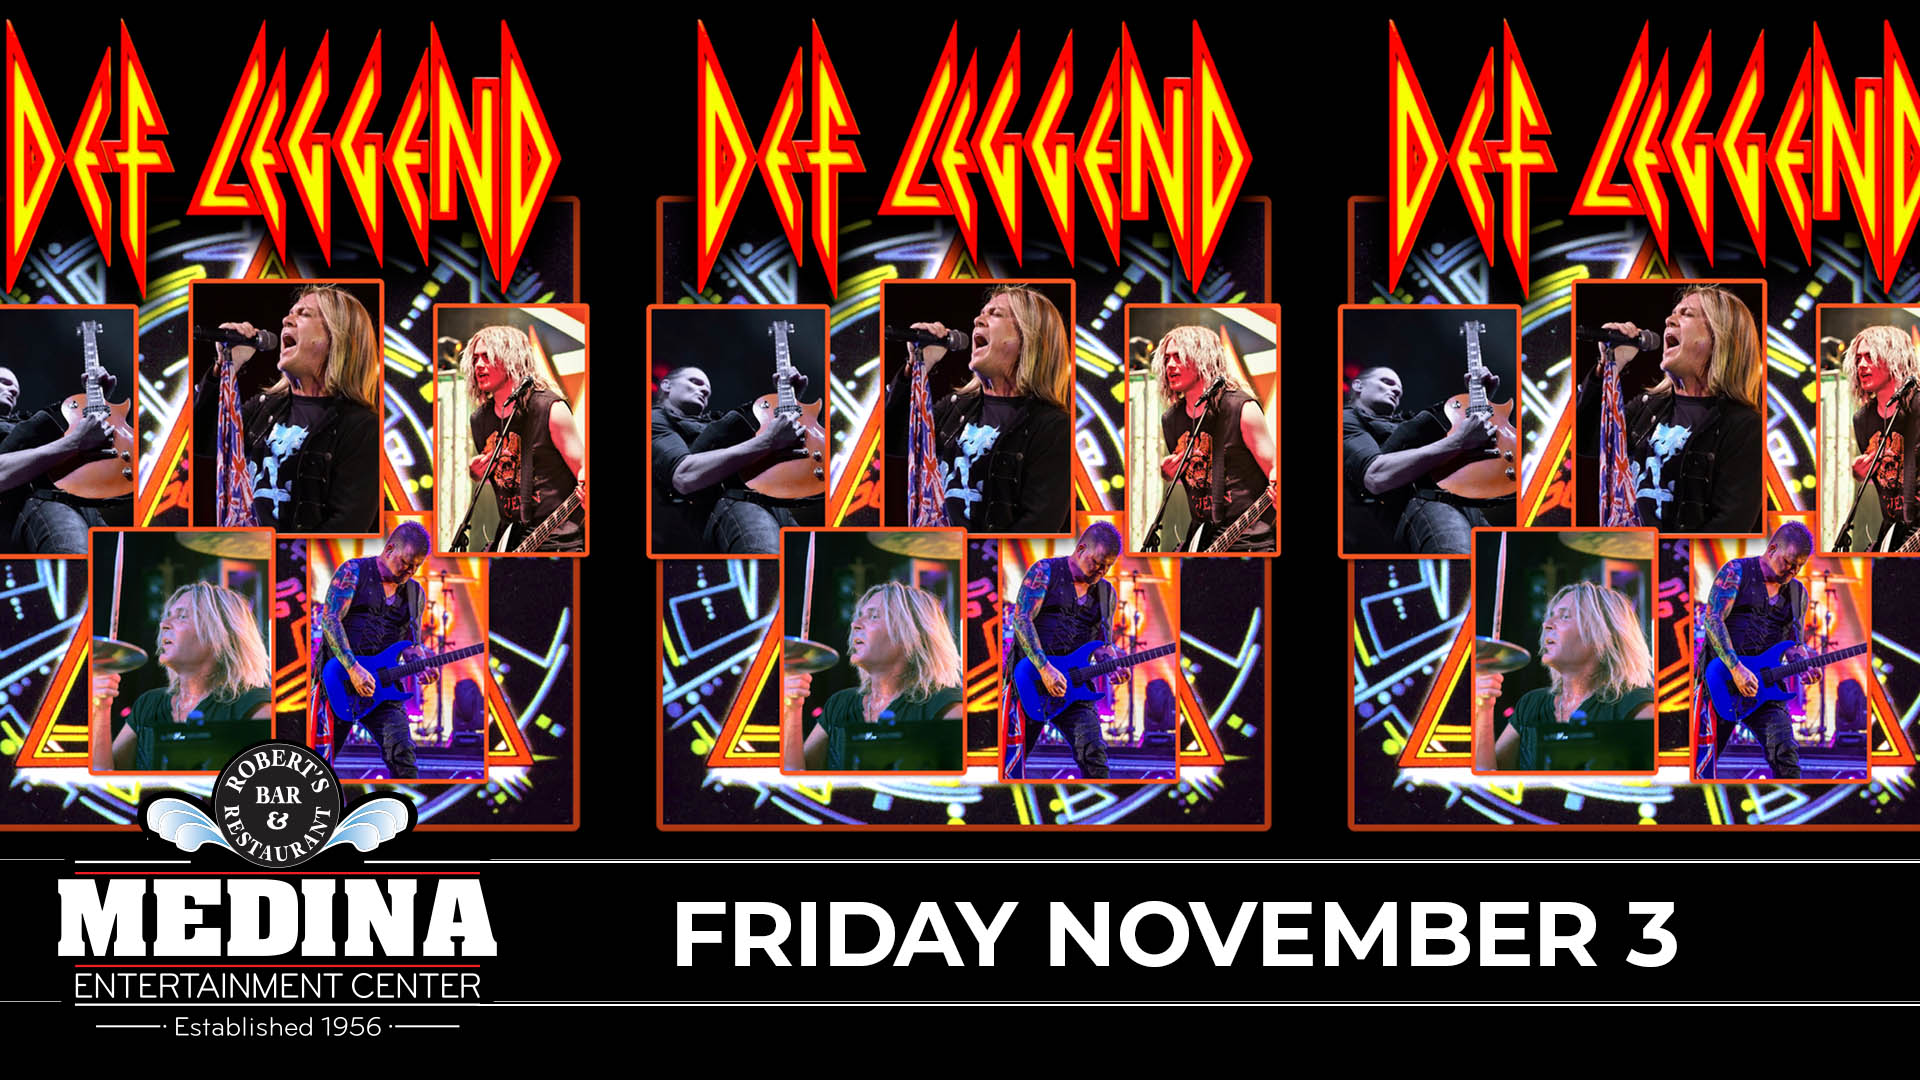 DEF LEGGEND - Def Leppard Tribute with guest HEARTLESS Medina Entertainment Center Friday, November 3, 2023 Doors: 7:00 PM | Music: 8:00 PM | 21+ Tickets on-sale Friday, June 30 at 11am GA Ticket Prices: $17 Advance / $22 Day Of Show plus applicable fees